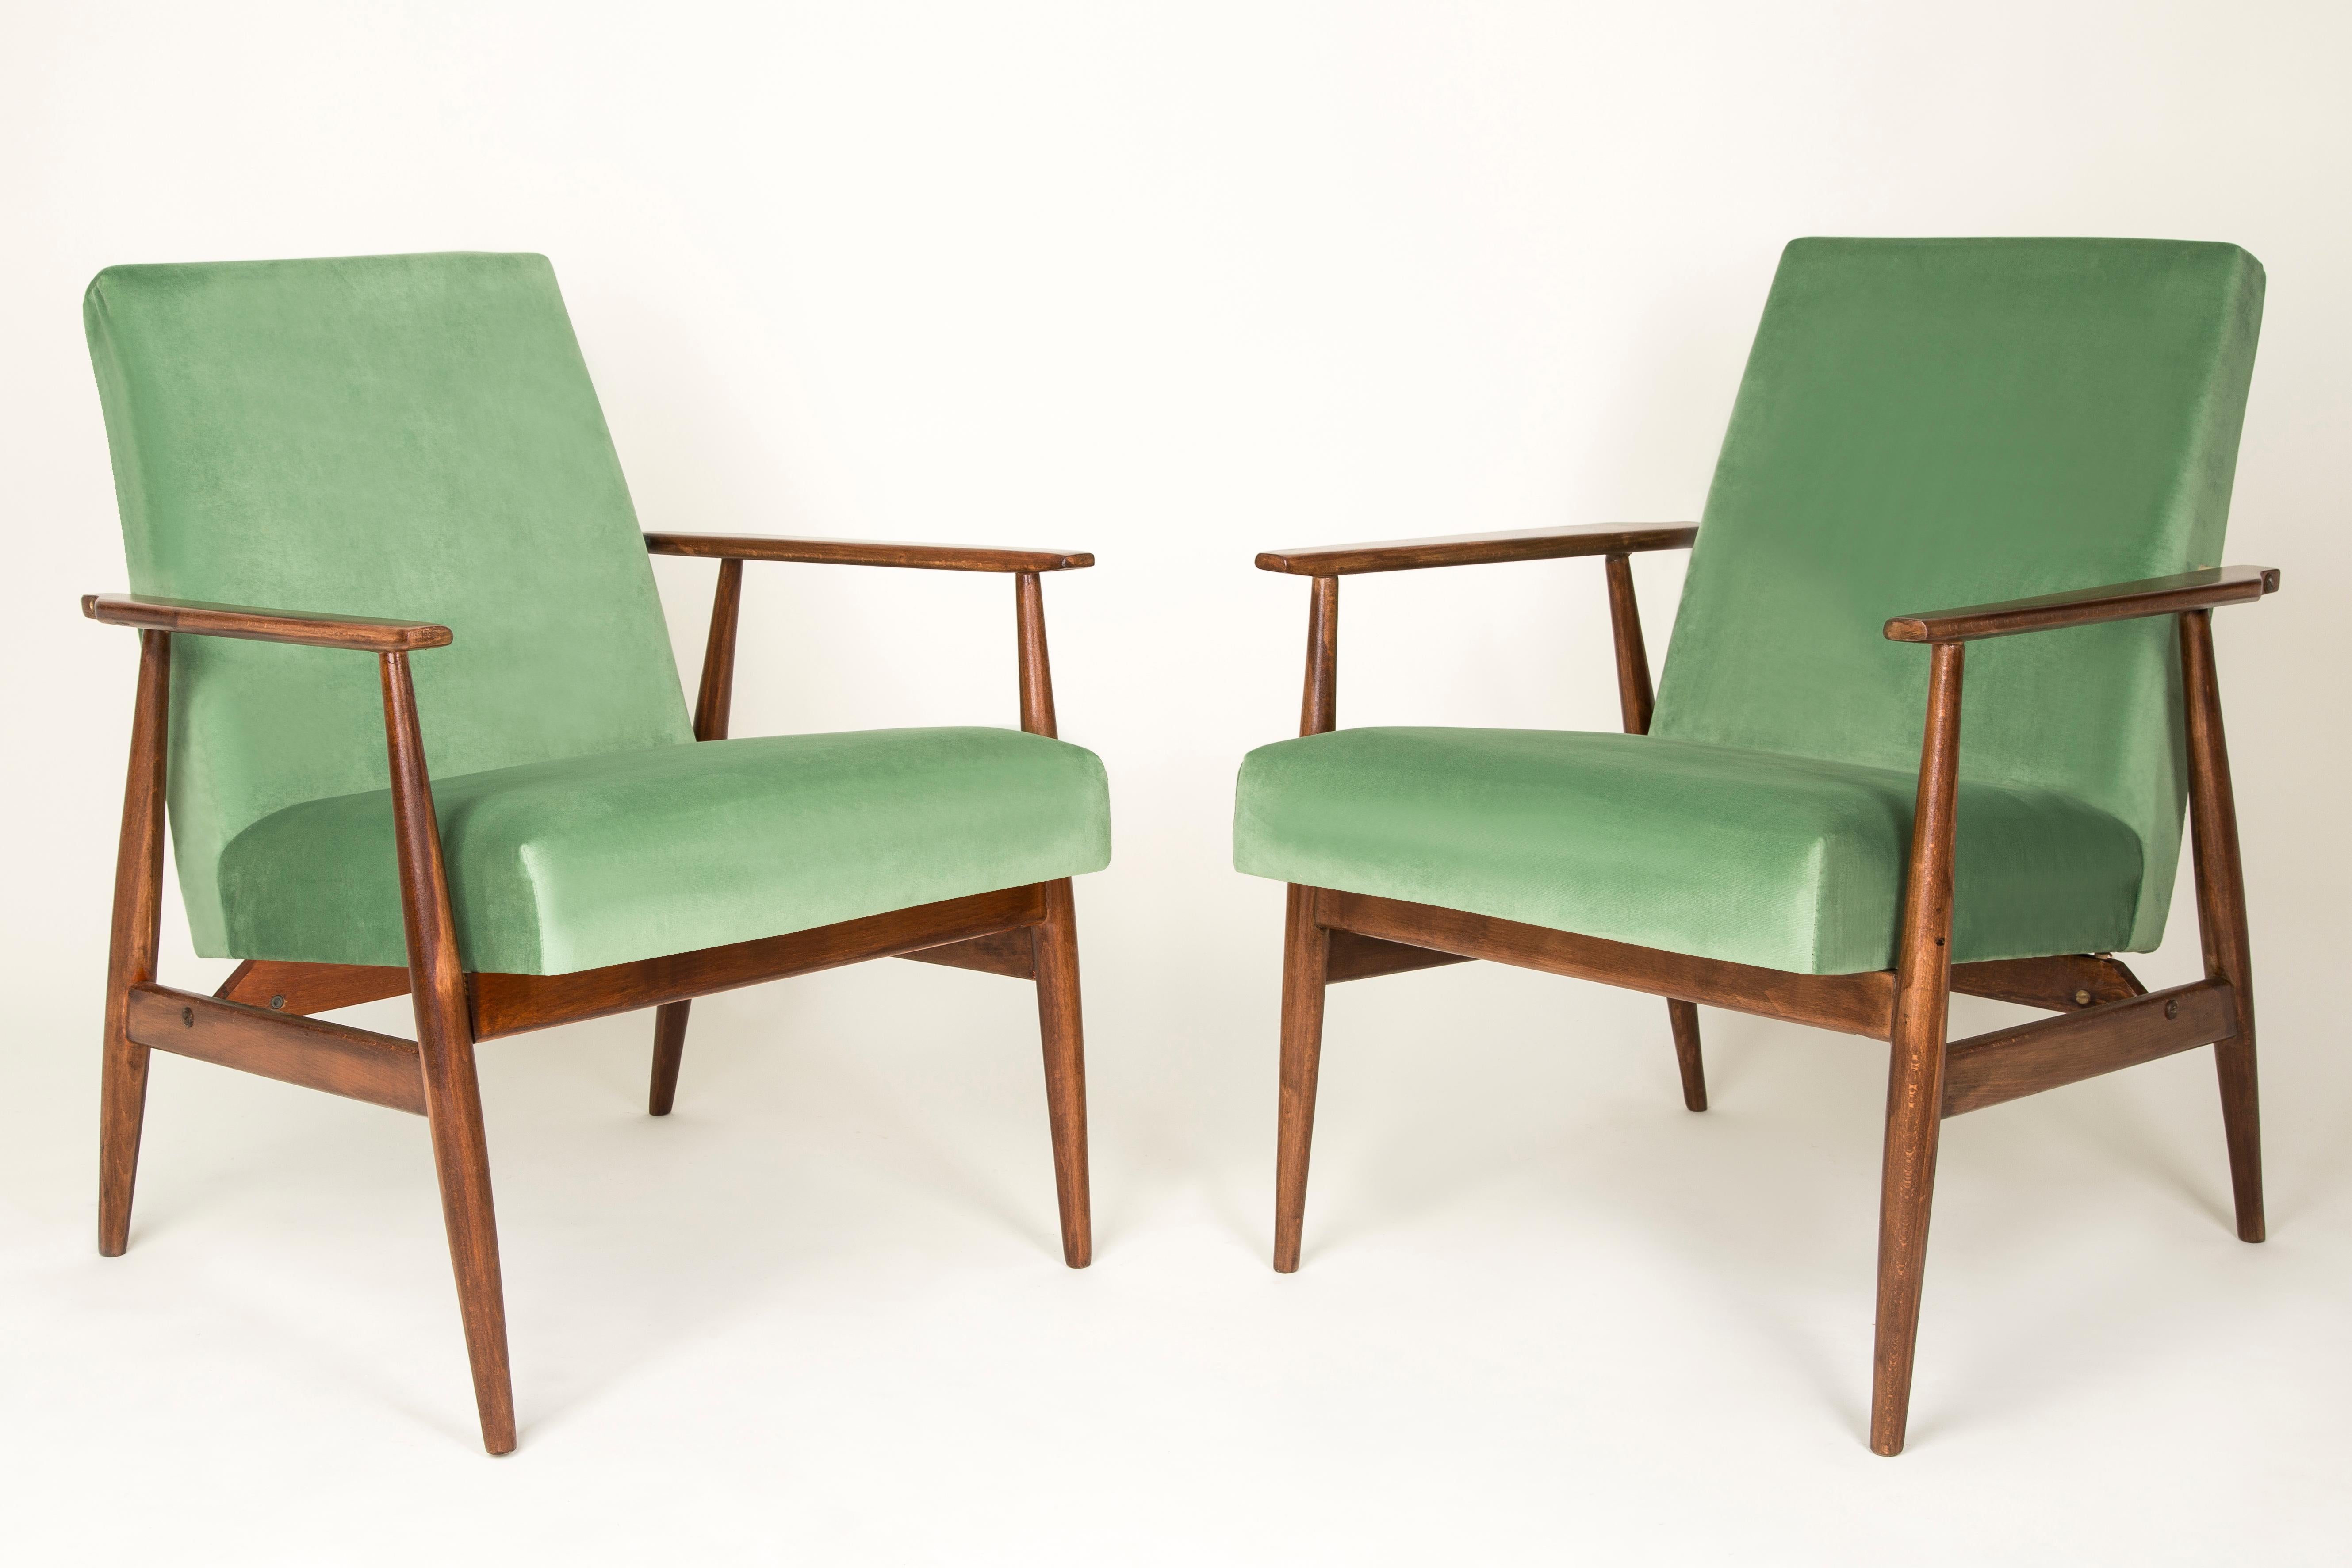 A beautiful, restored armchairs designed by Henryk Lis. Furniture after full carpentry and upholstery renovation. The fabric, which is covered with a backrest and a seat, is a high-quality velor upholstery. The armchairs will be perfect in